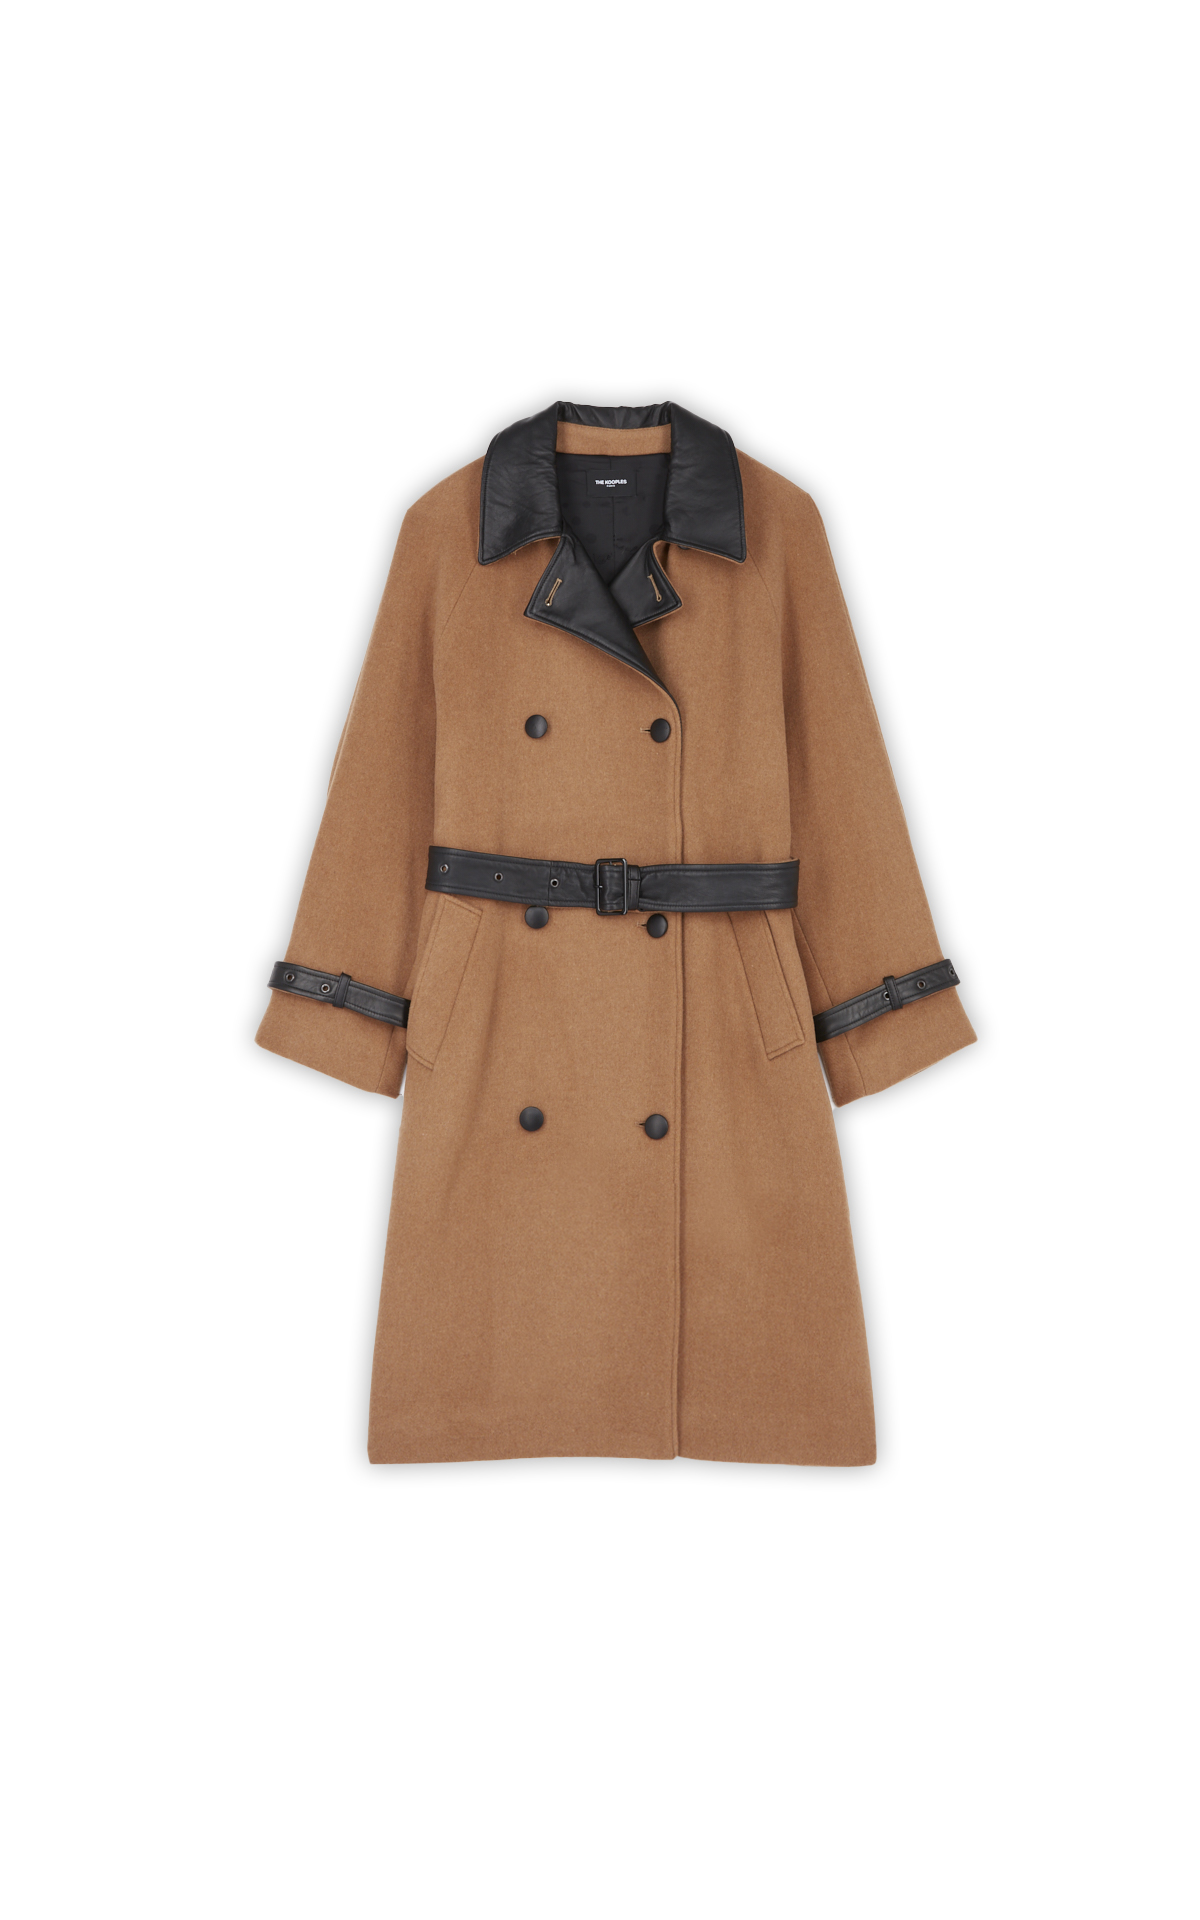 Long camel coat with black leather collar*